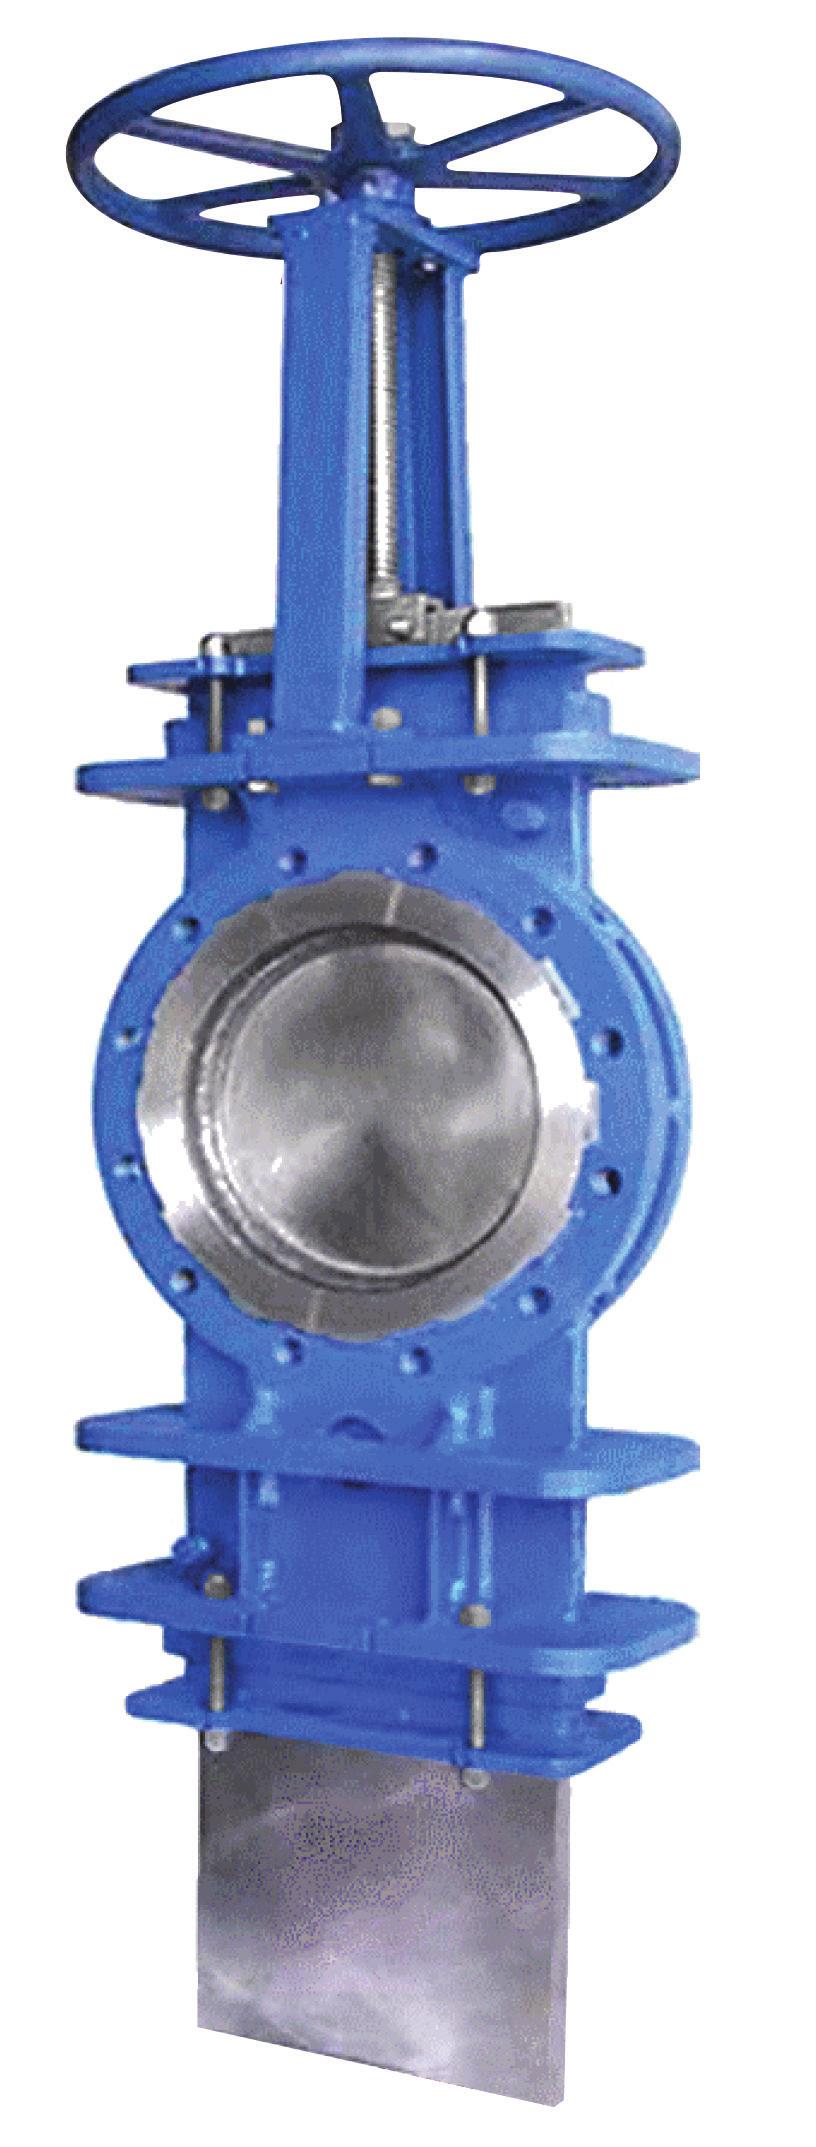 Figure 82 Fabricated Slide Gate Valve Fabricated stainless steel lined body ideally suited for wet or dry dense and abrasive media. Stainless steel stem, gate, seat, body liner, and raised face.